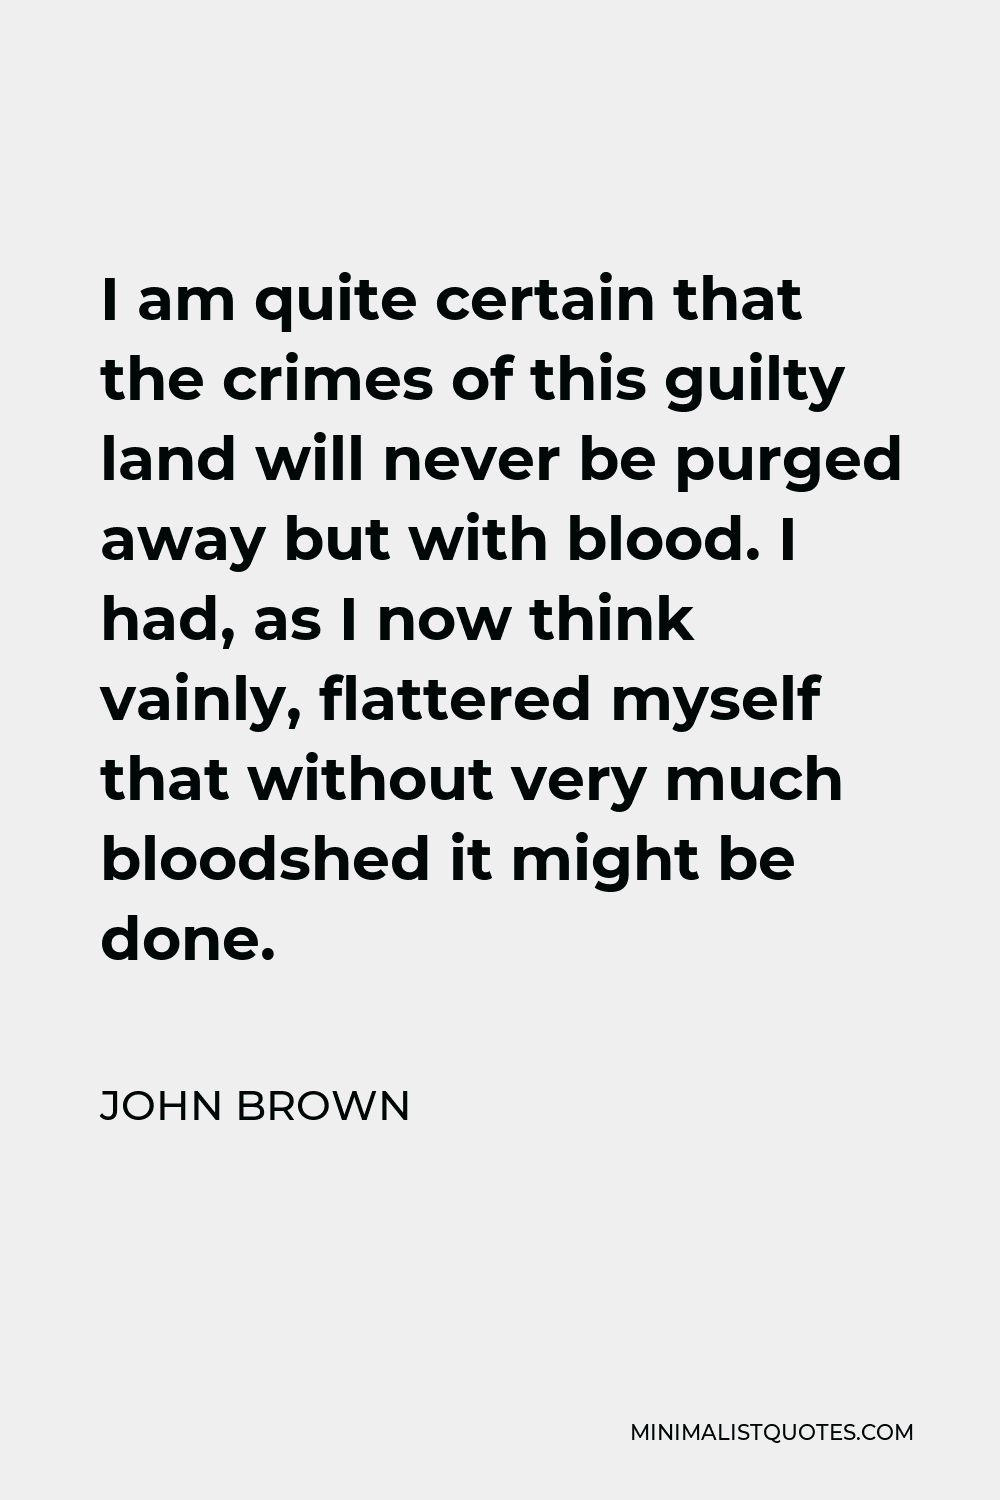 John Brown Quote - I am quite certain that the crimes of this guilty land will never be purged away but with blood. I had, as I now think vainly, flattered myself that without very much bloodshed it might be done.